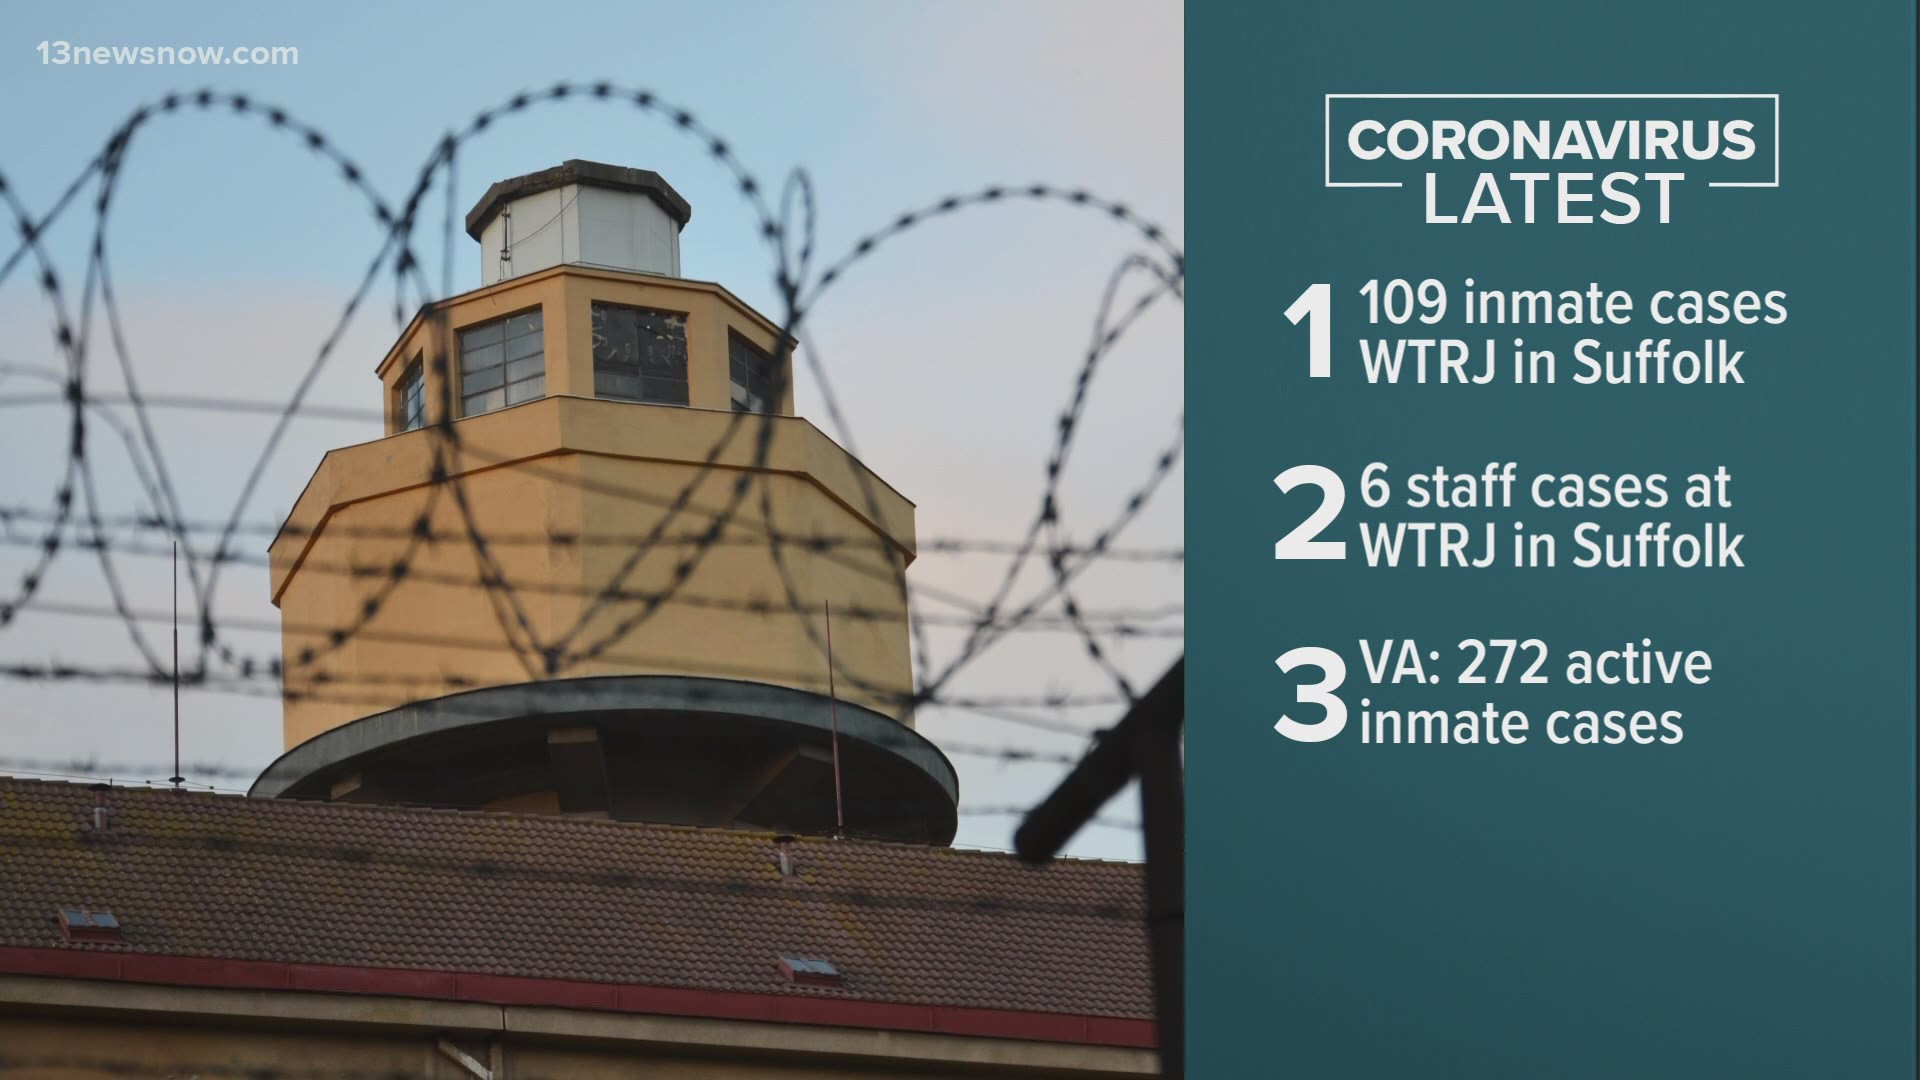 There are 109 inmate cases at the jail and six staff cases.